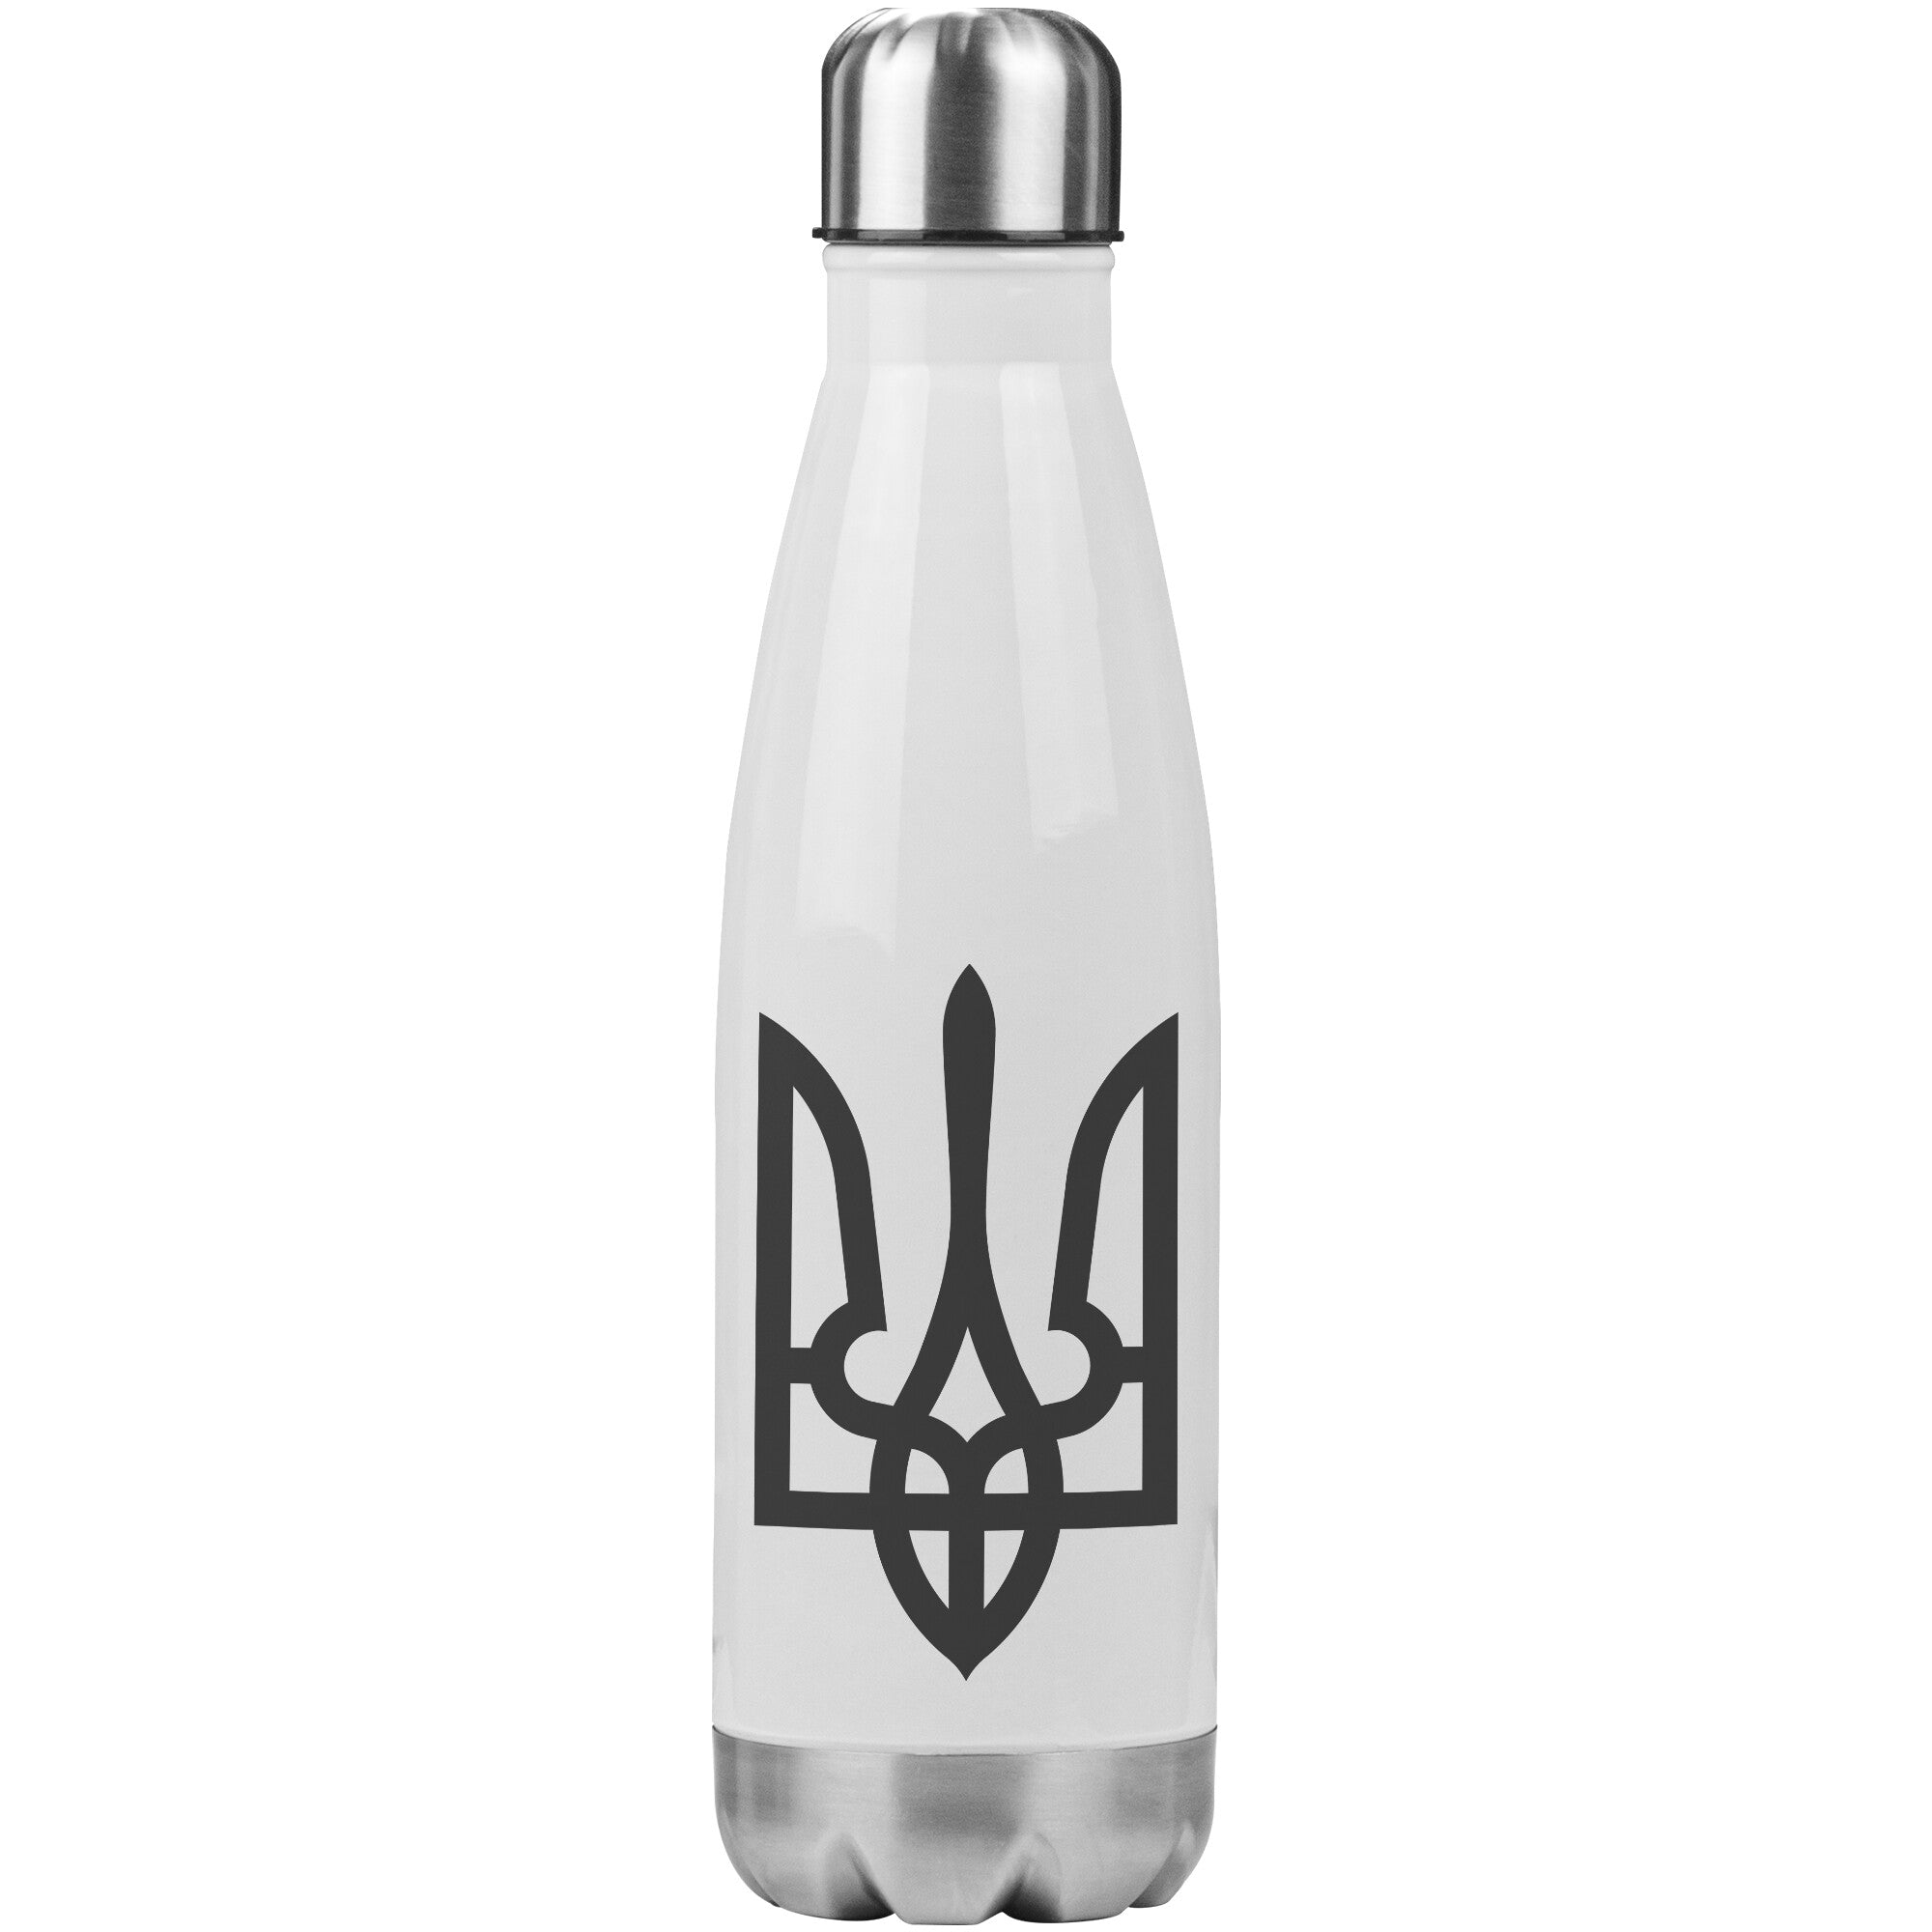 Tryzub (Black) - 20oz Insulated Water Bottle